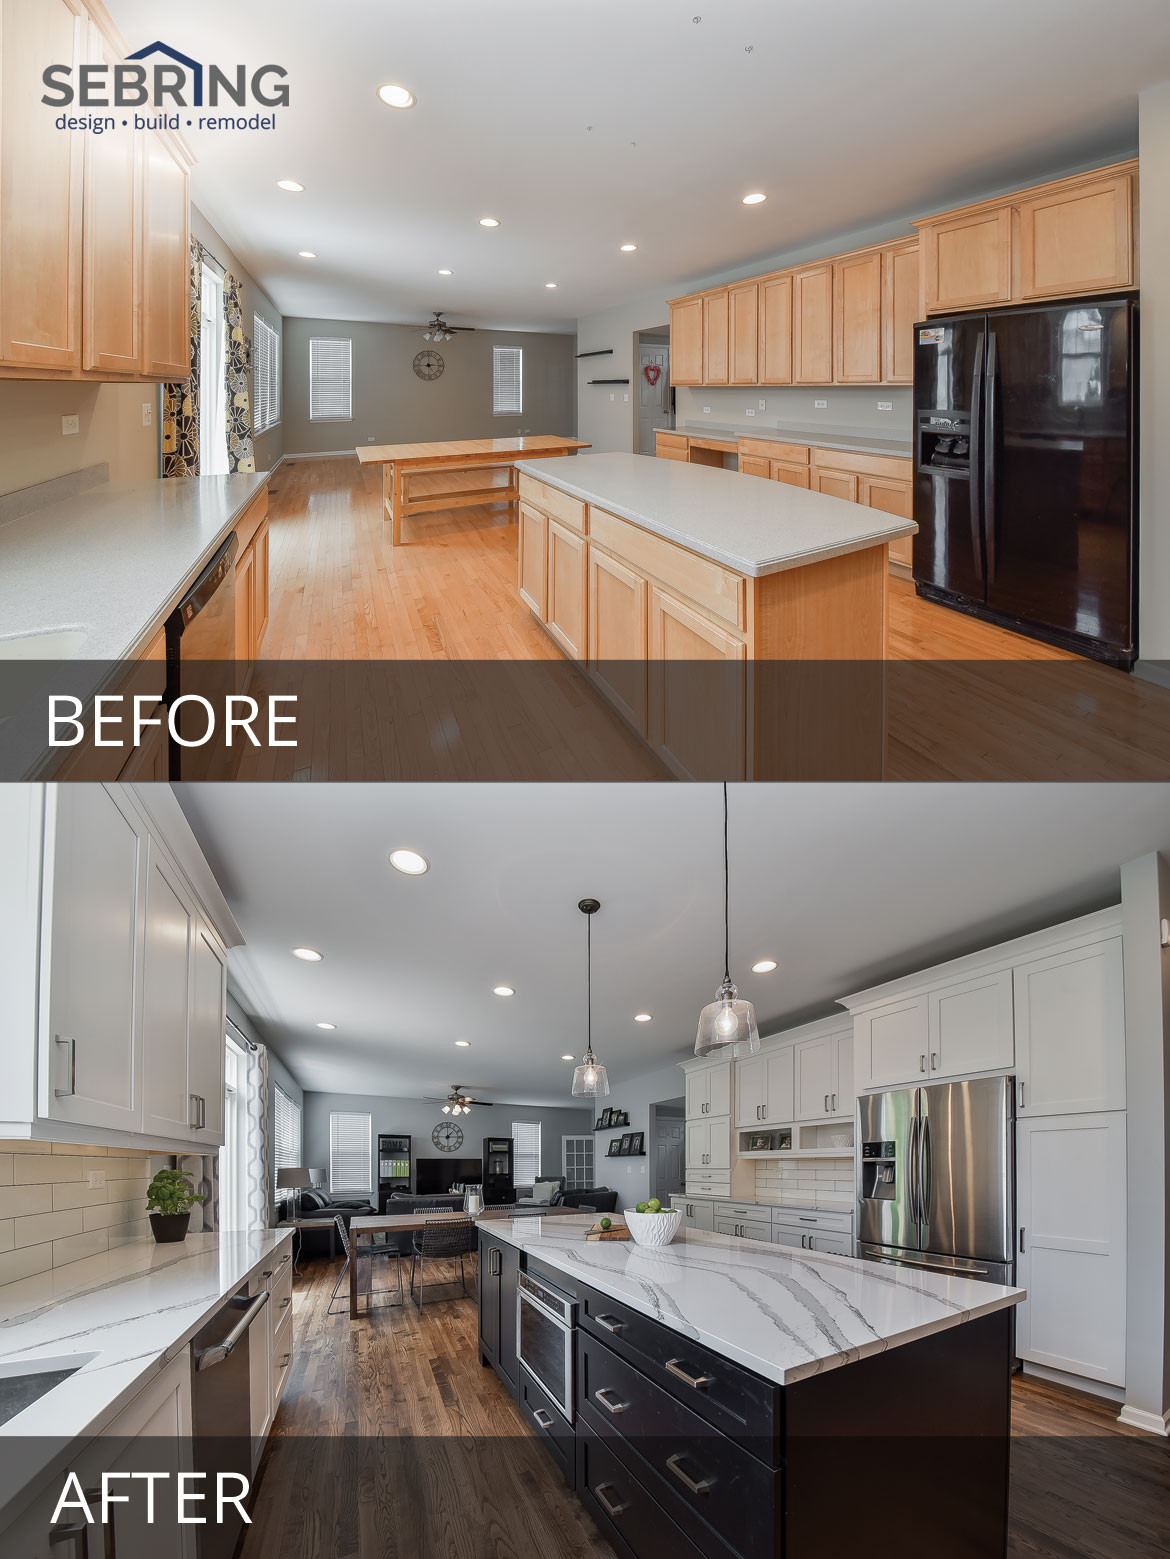 Kitchen Remodels Before And After
 Pete & Mary s Kitchen Before & After